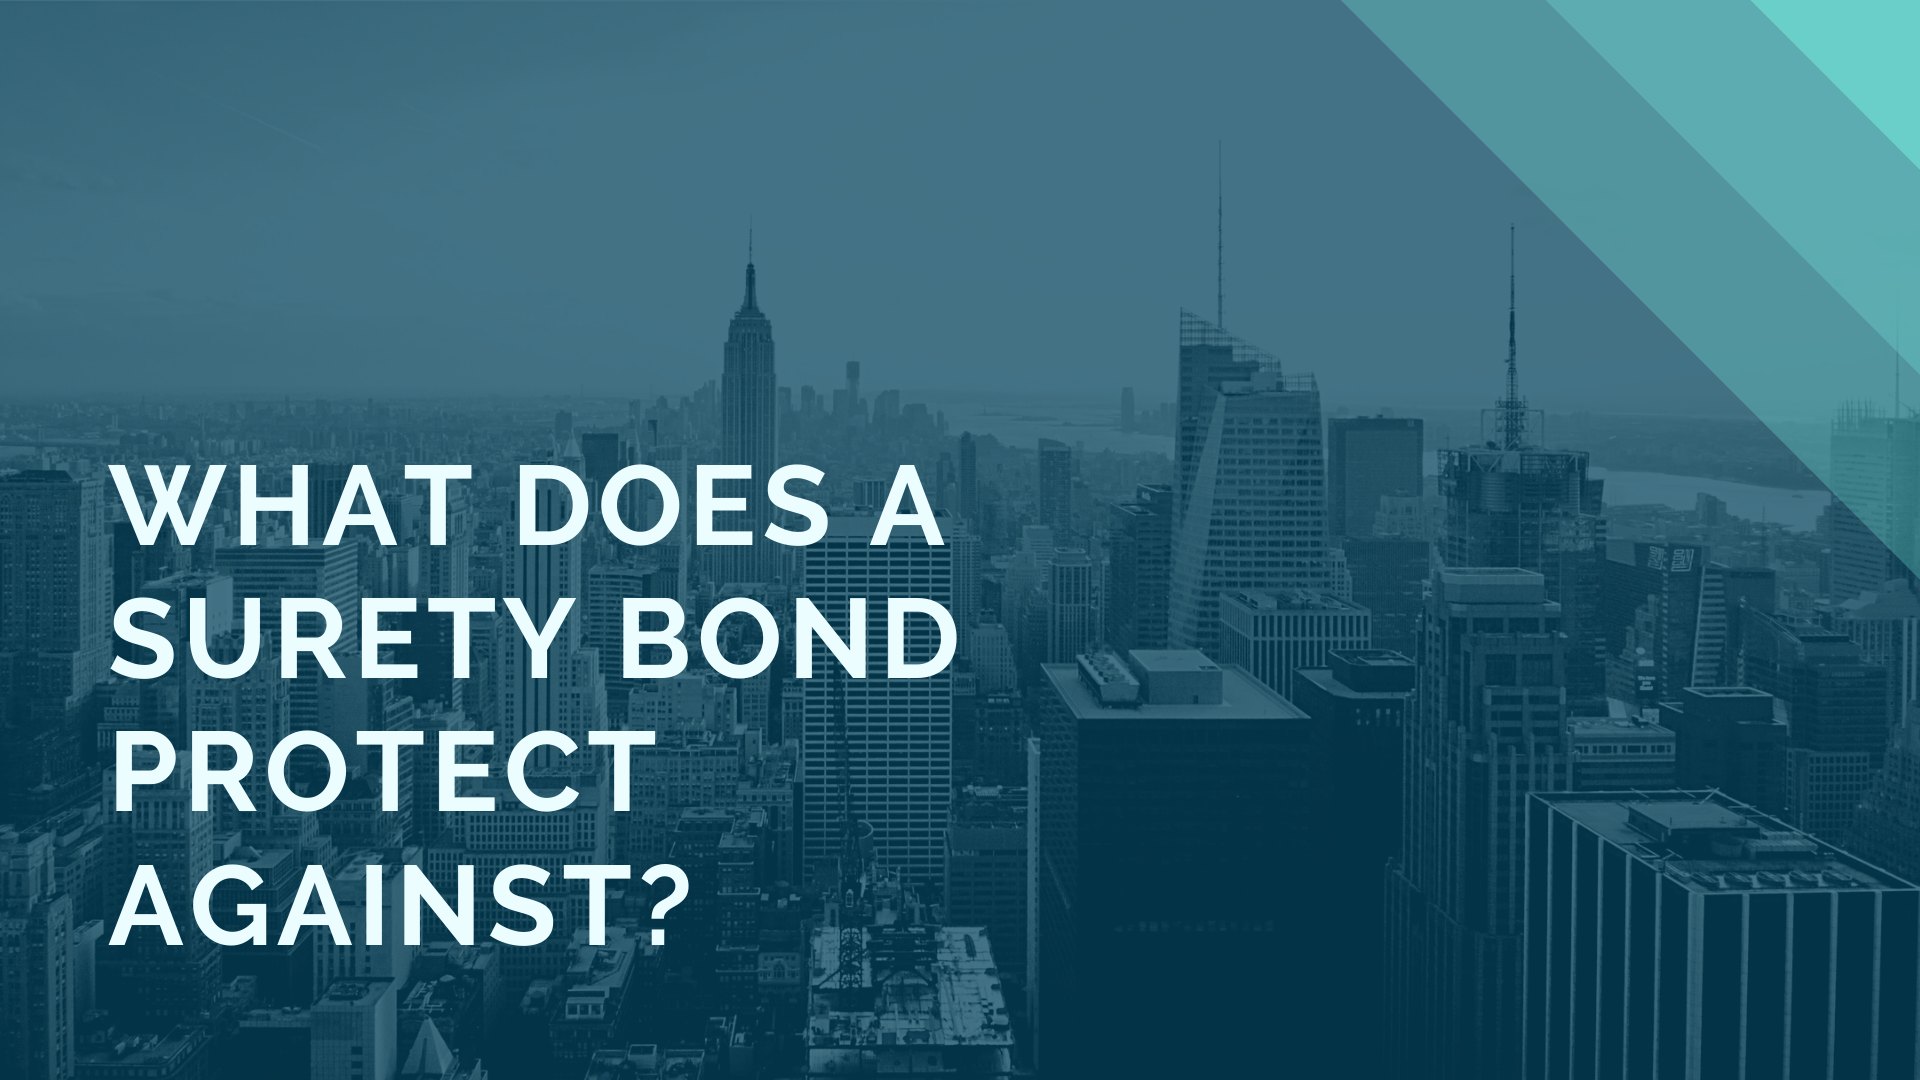 surety bond - What does a Surety Bond protect against - buildings in blue shade